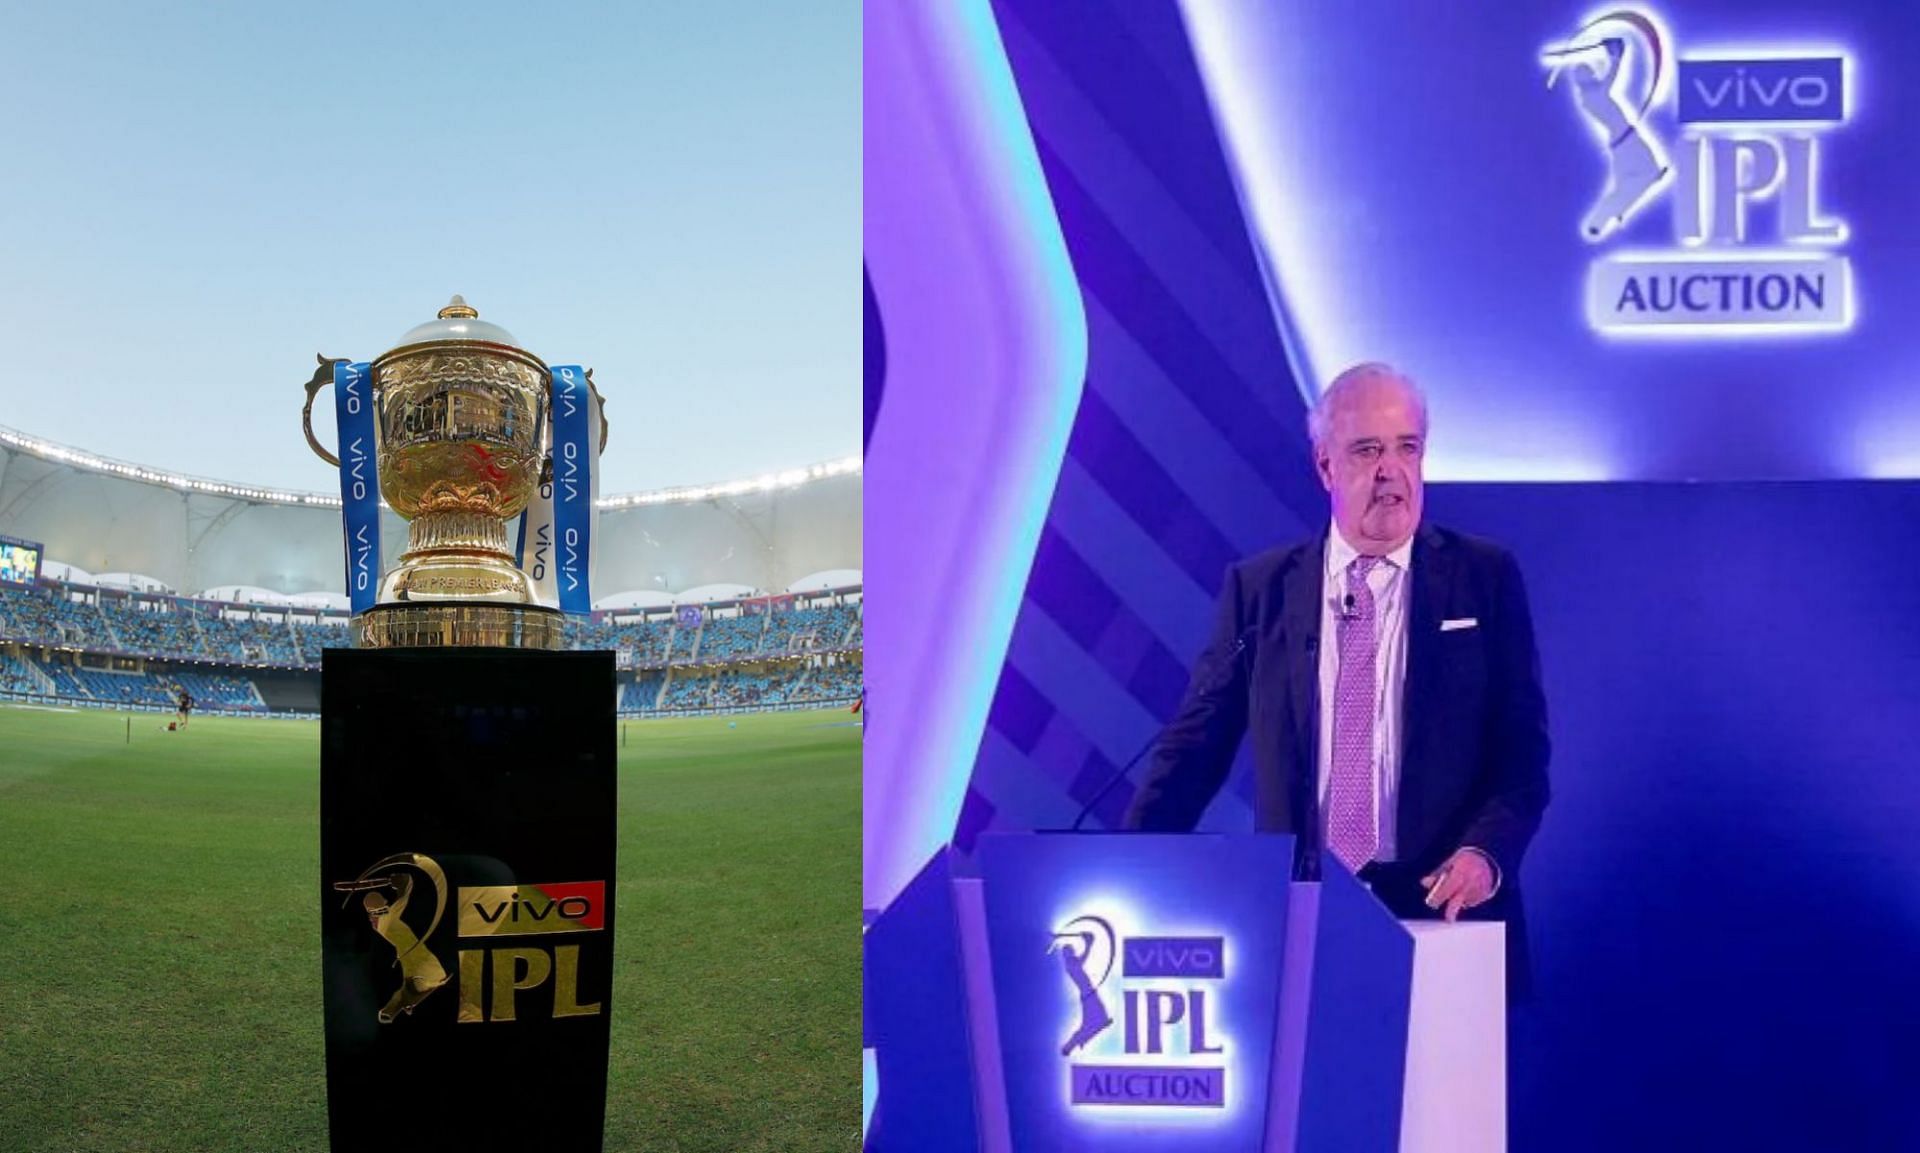 The Indian Premier League 2022 auction will be held on February 12 and 13. 